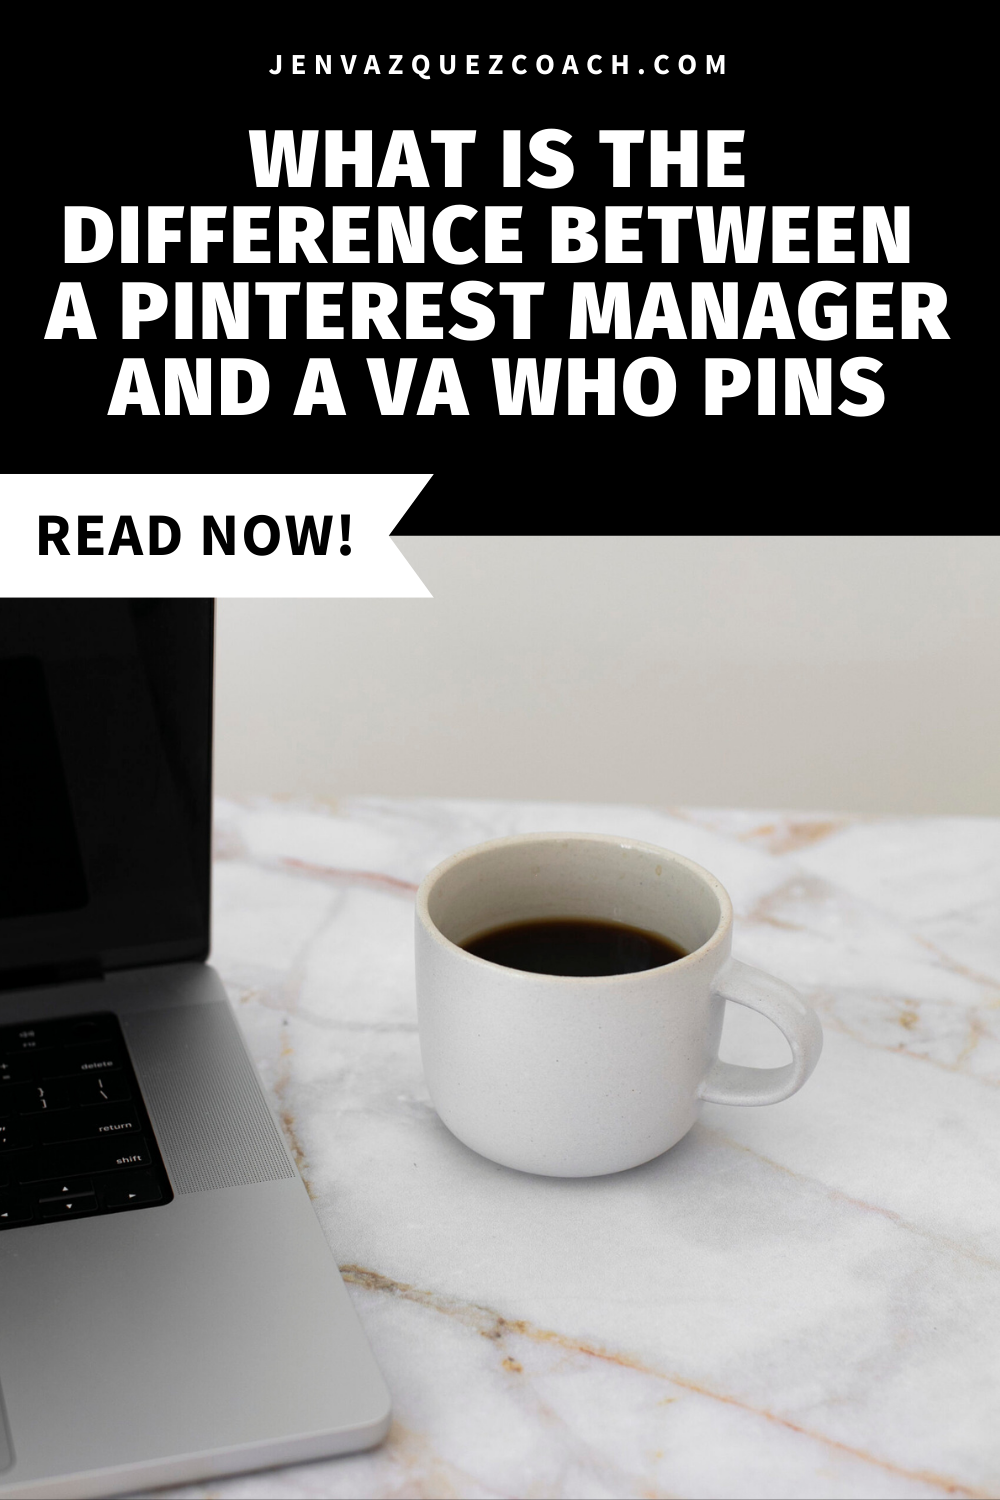 What Is The Difference Between A Pinterest Manager And a VA Who Pins